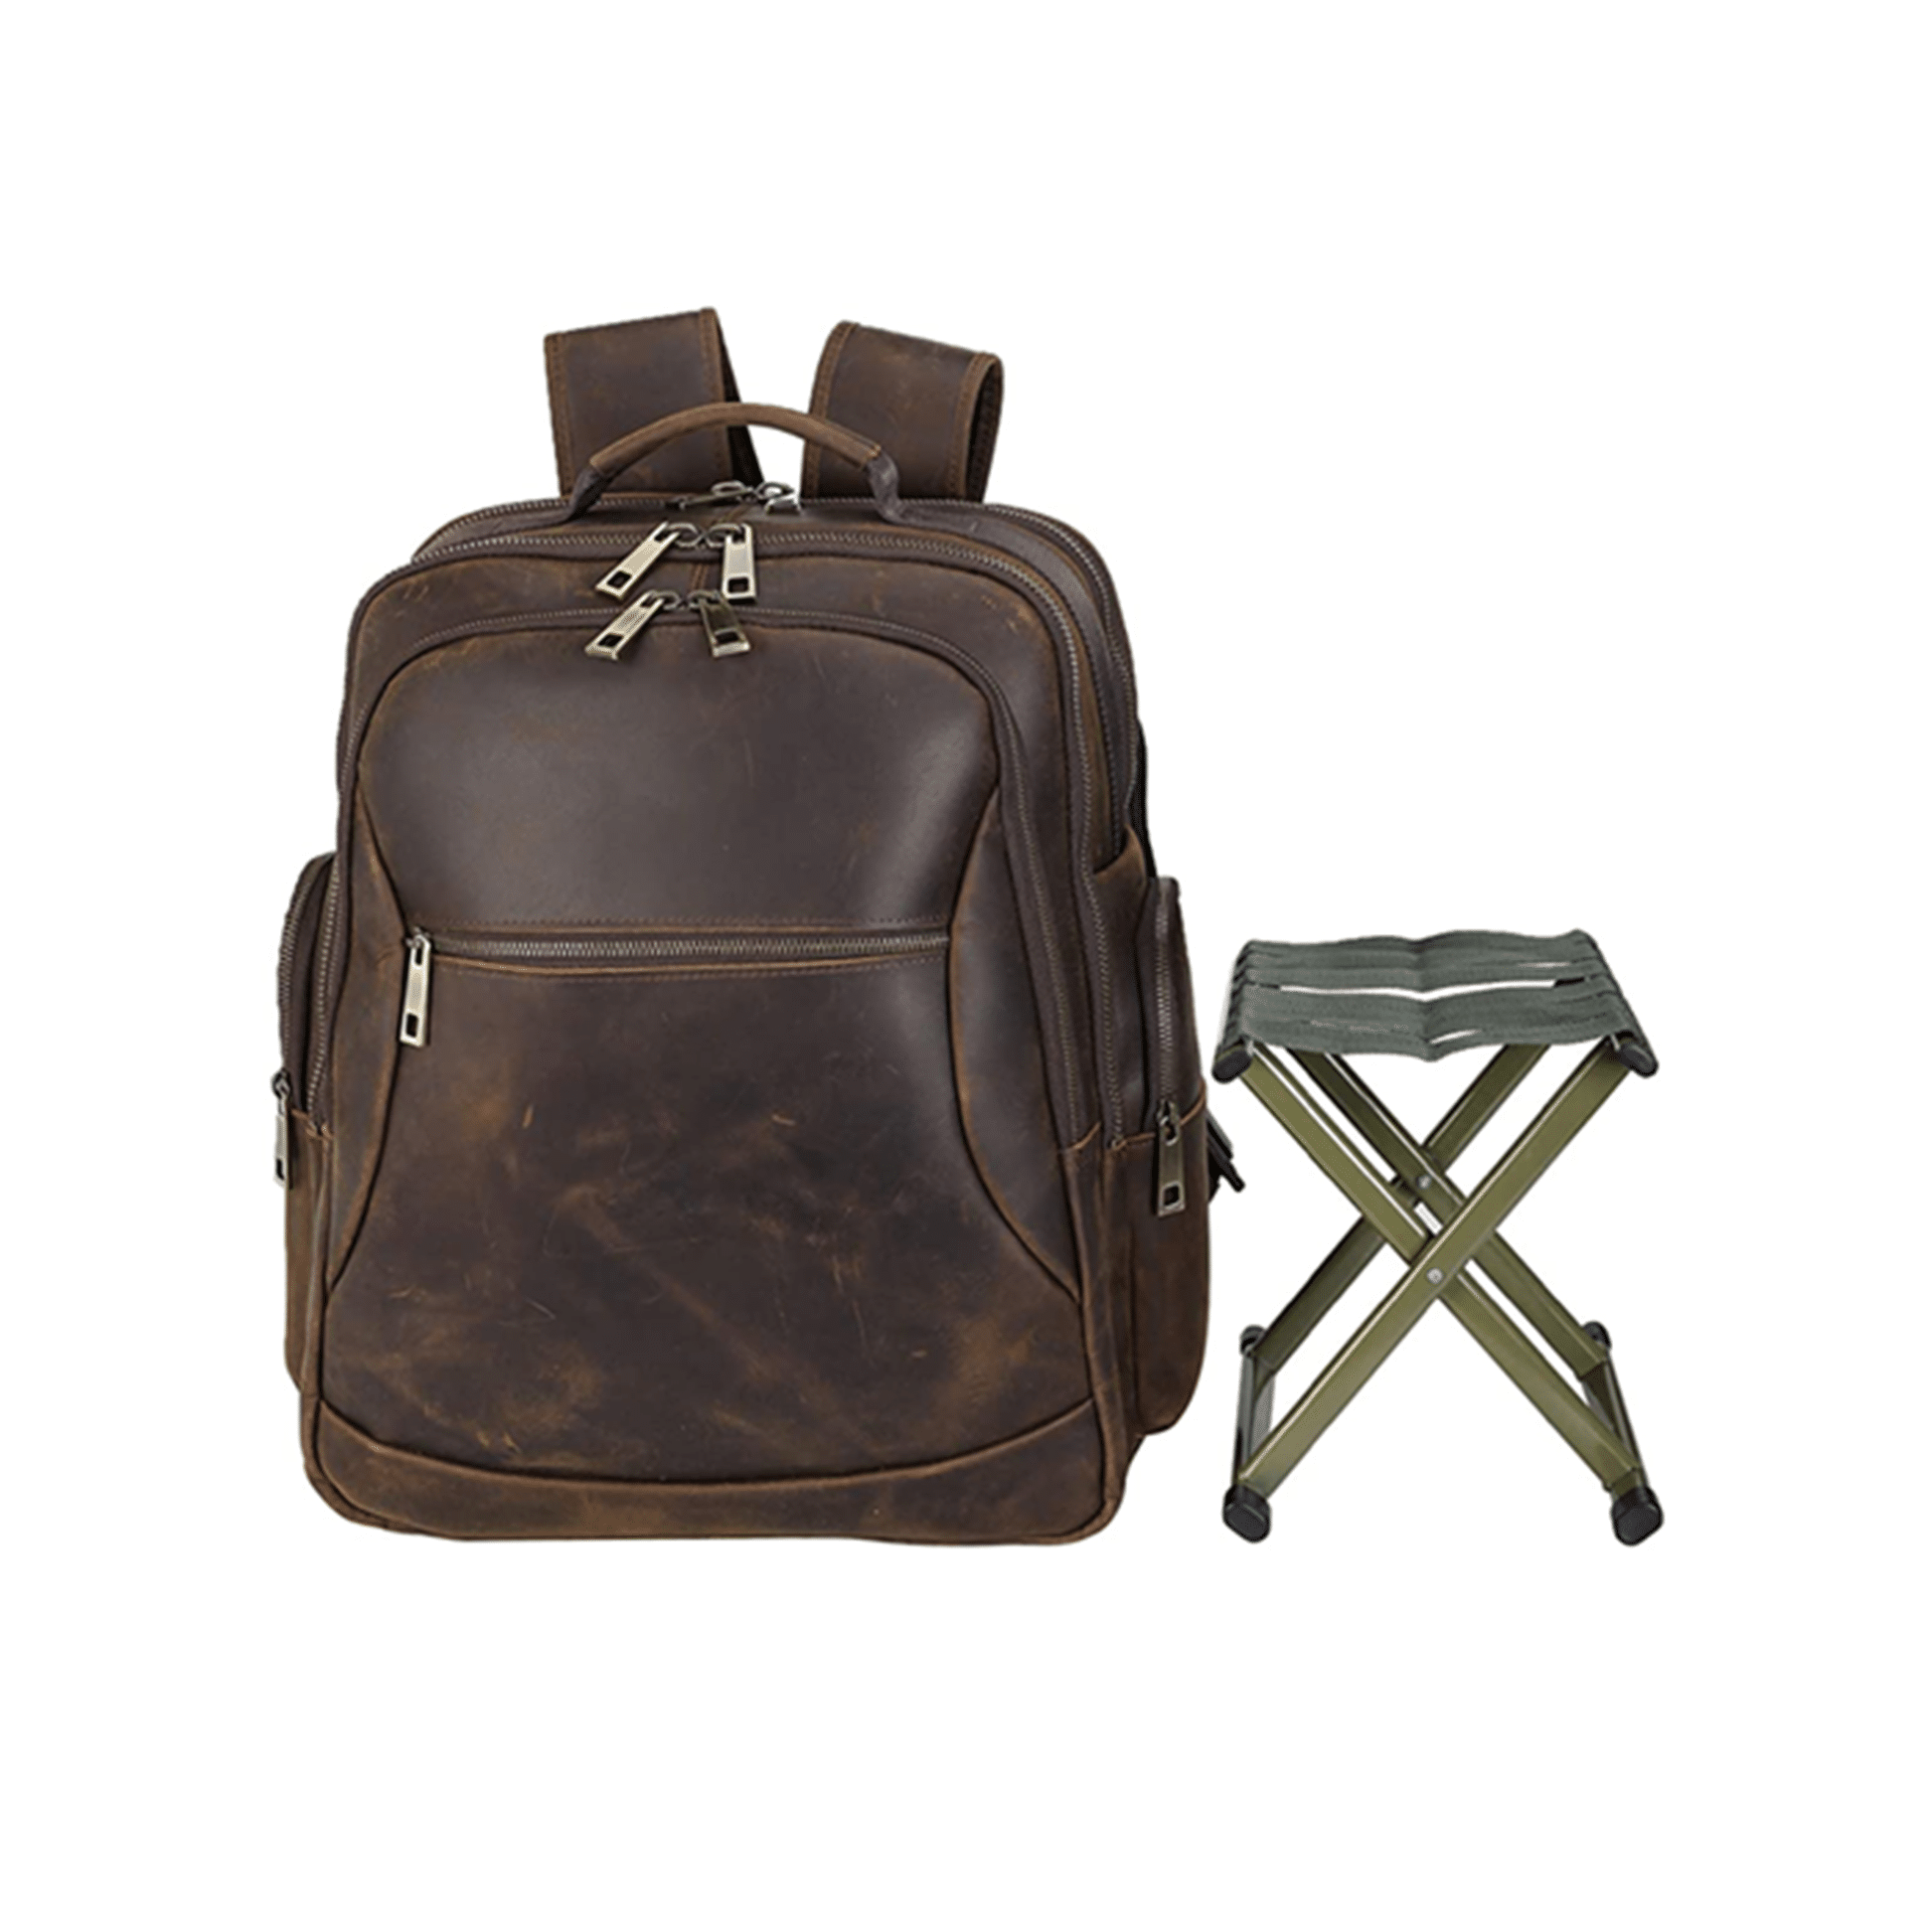 9. Polare Leather Backpack Stool Combo For Outdoor Activities 